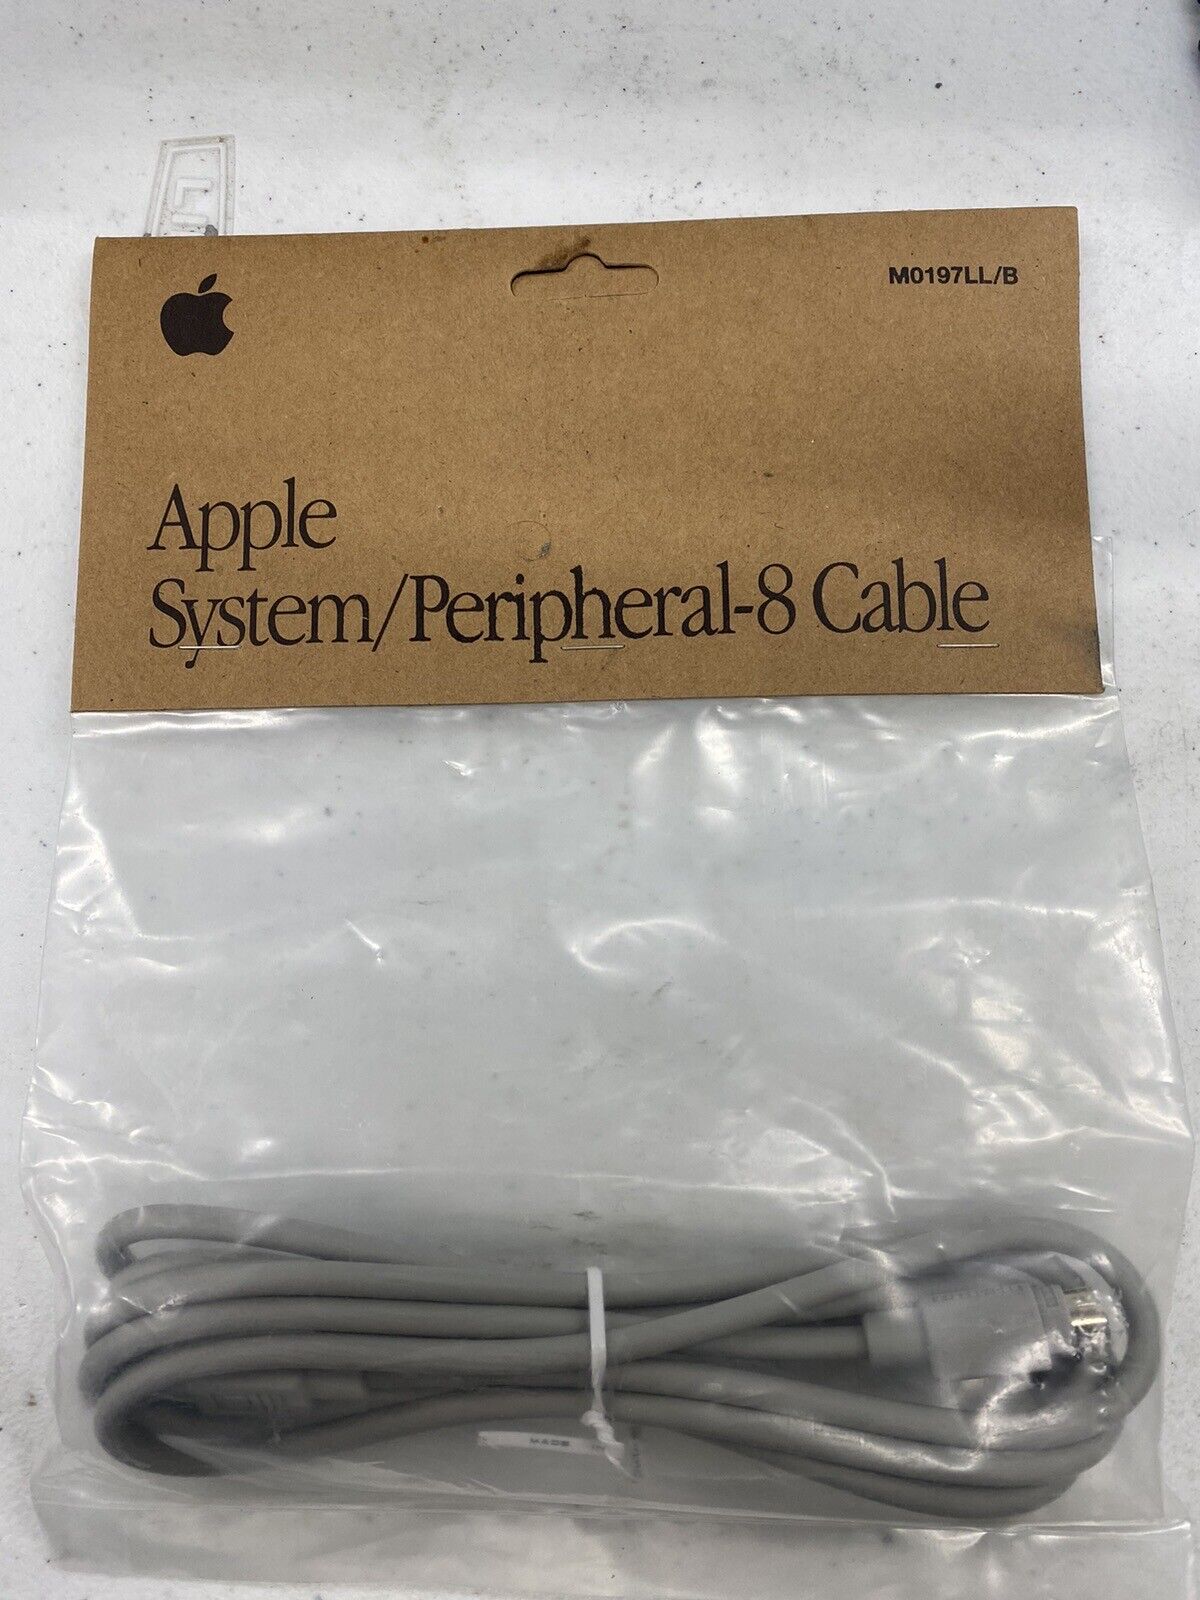 Vintage Apple System Peripheral 8 Cable New Old Stock Sealed M0197LL/B 